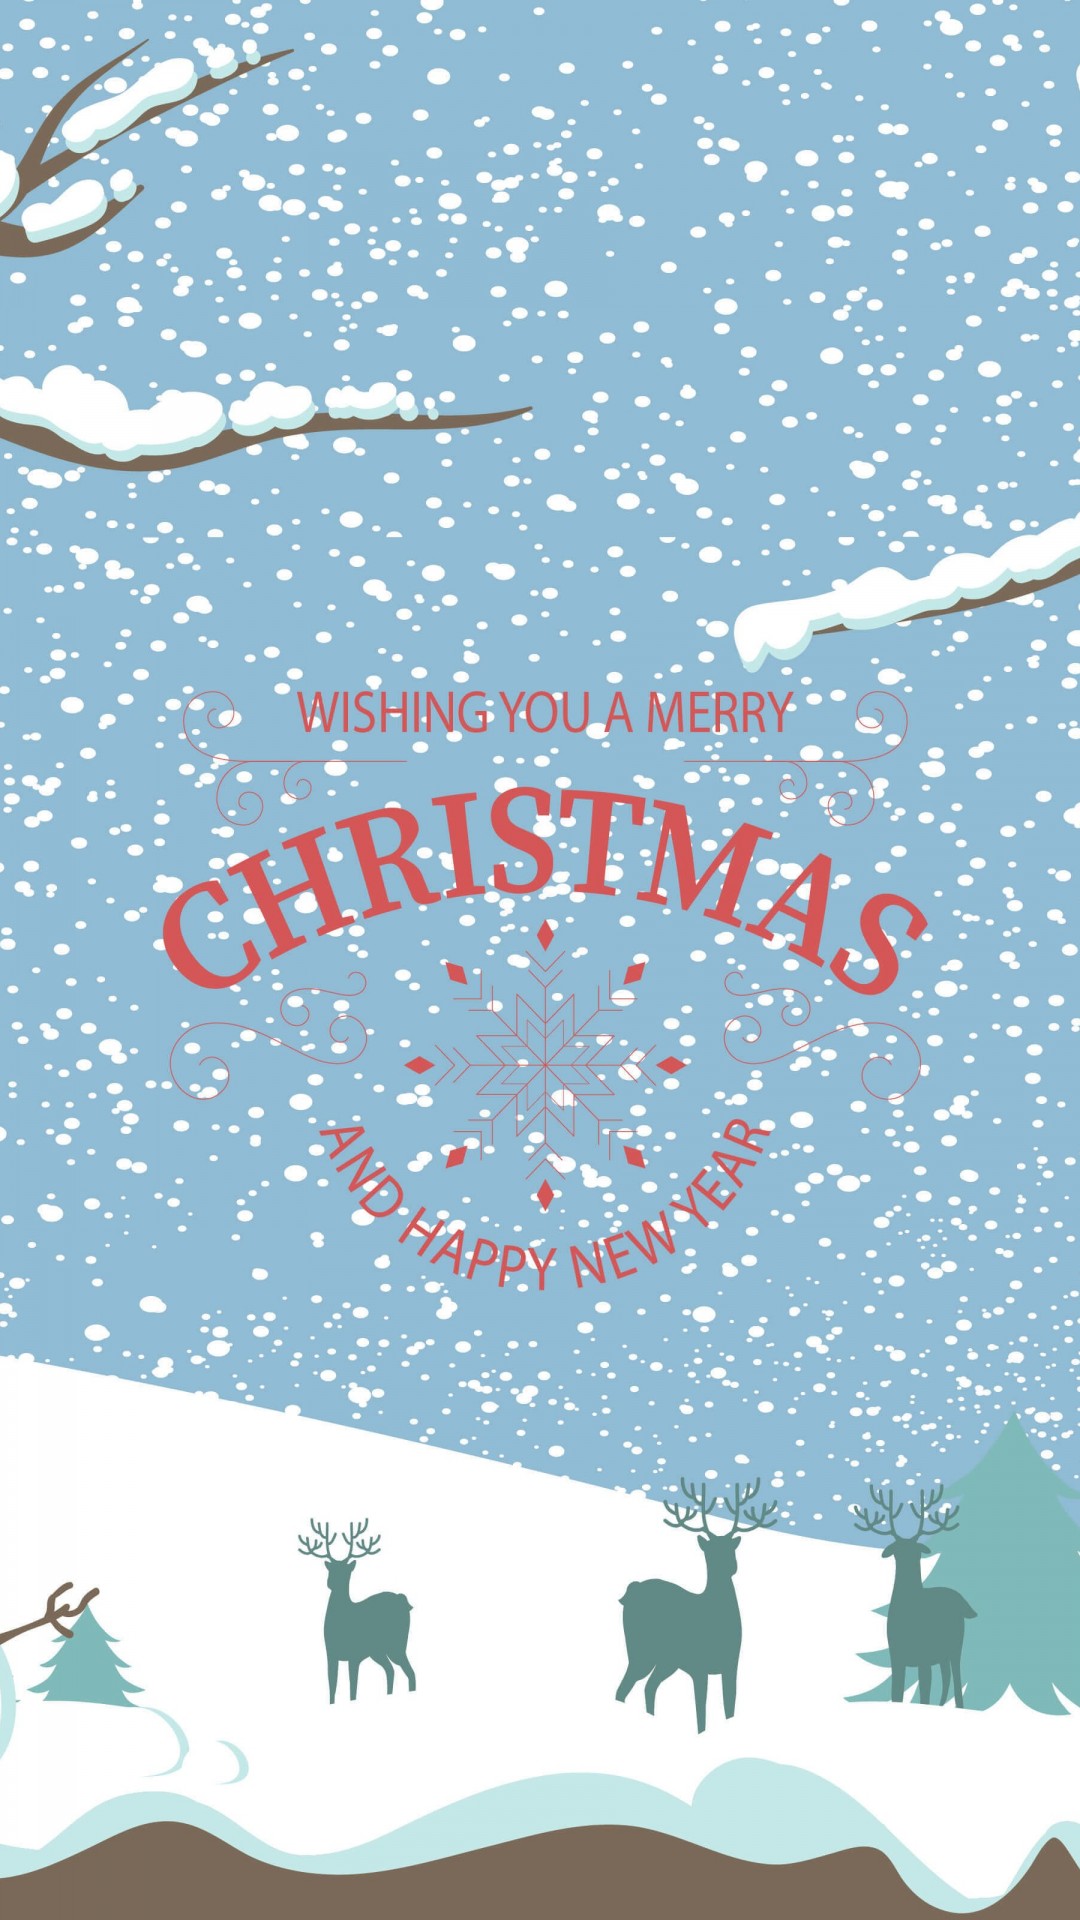 Merry Christmas Illustration Wallpaper for SONY Xperia Z3